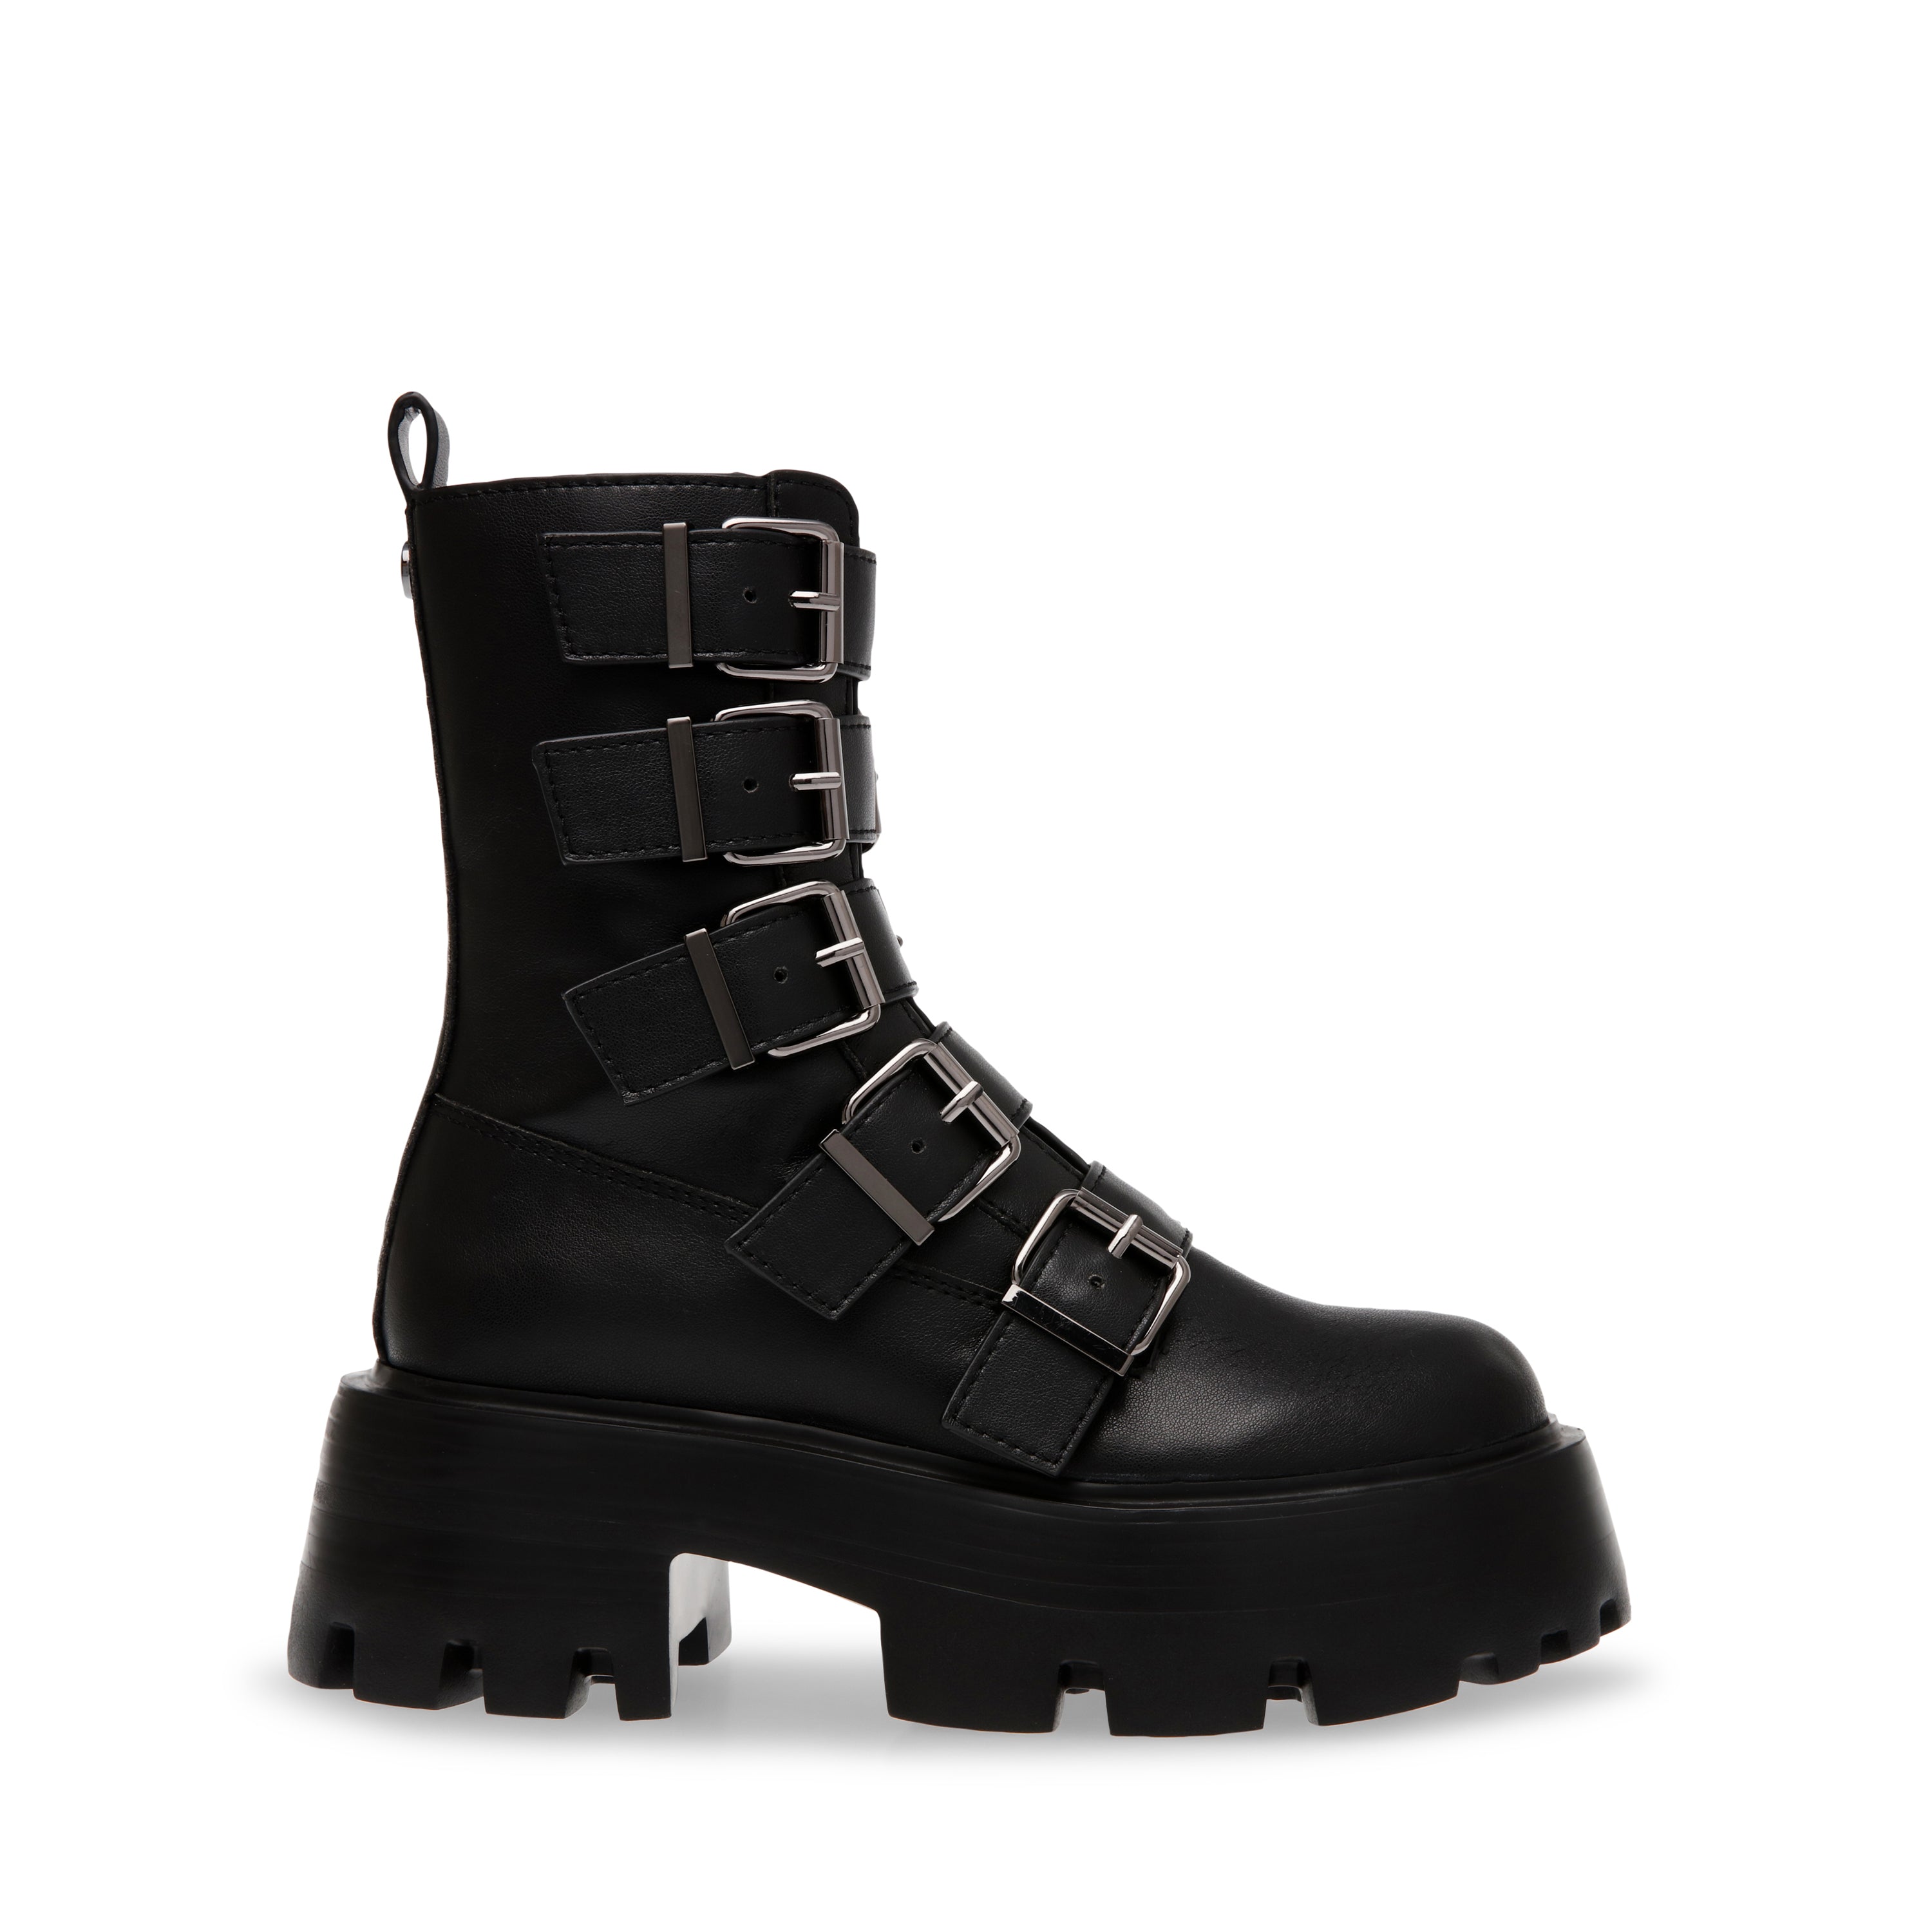 Out-Reach Bootie Black Action Leather